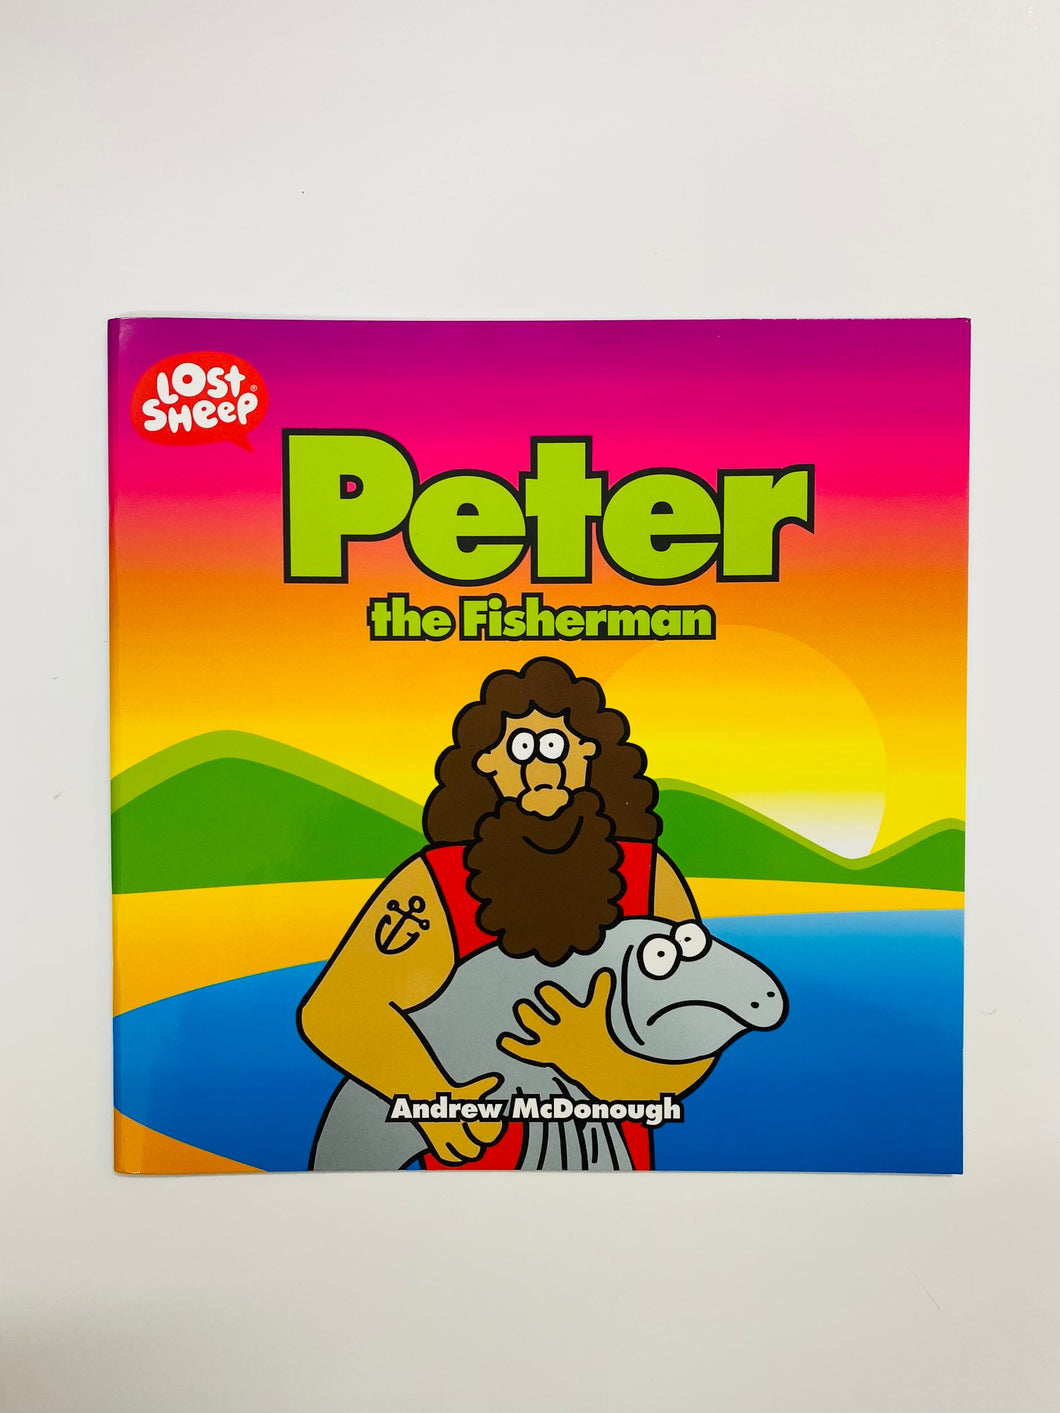 Lost Sheep: Peter the Fisherman